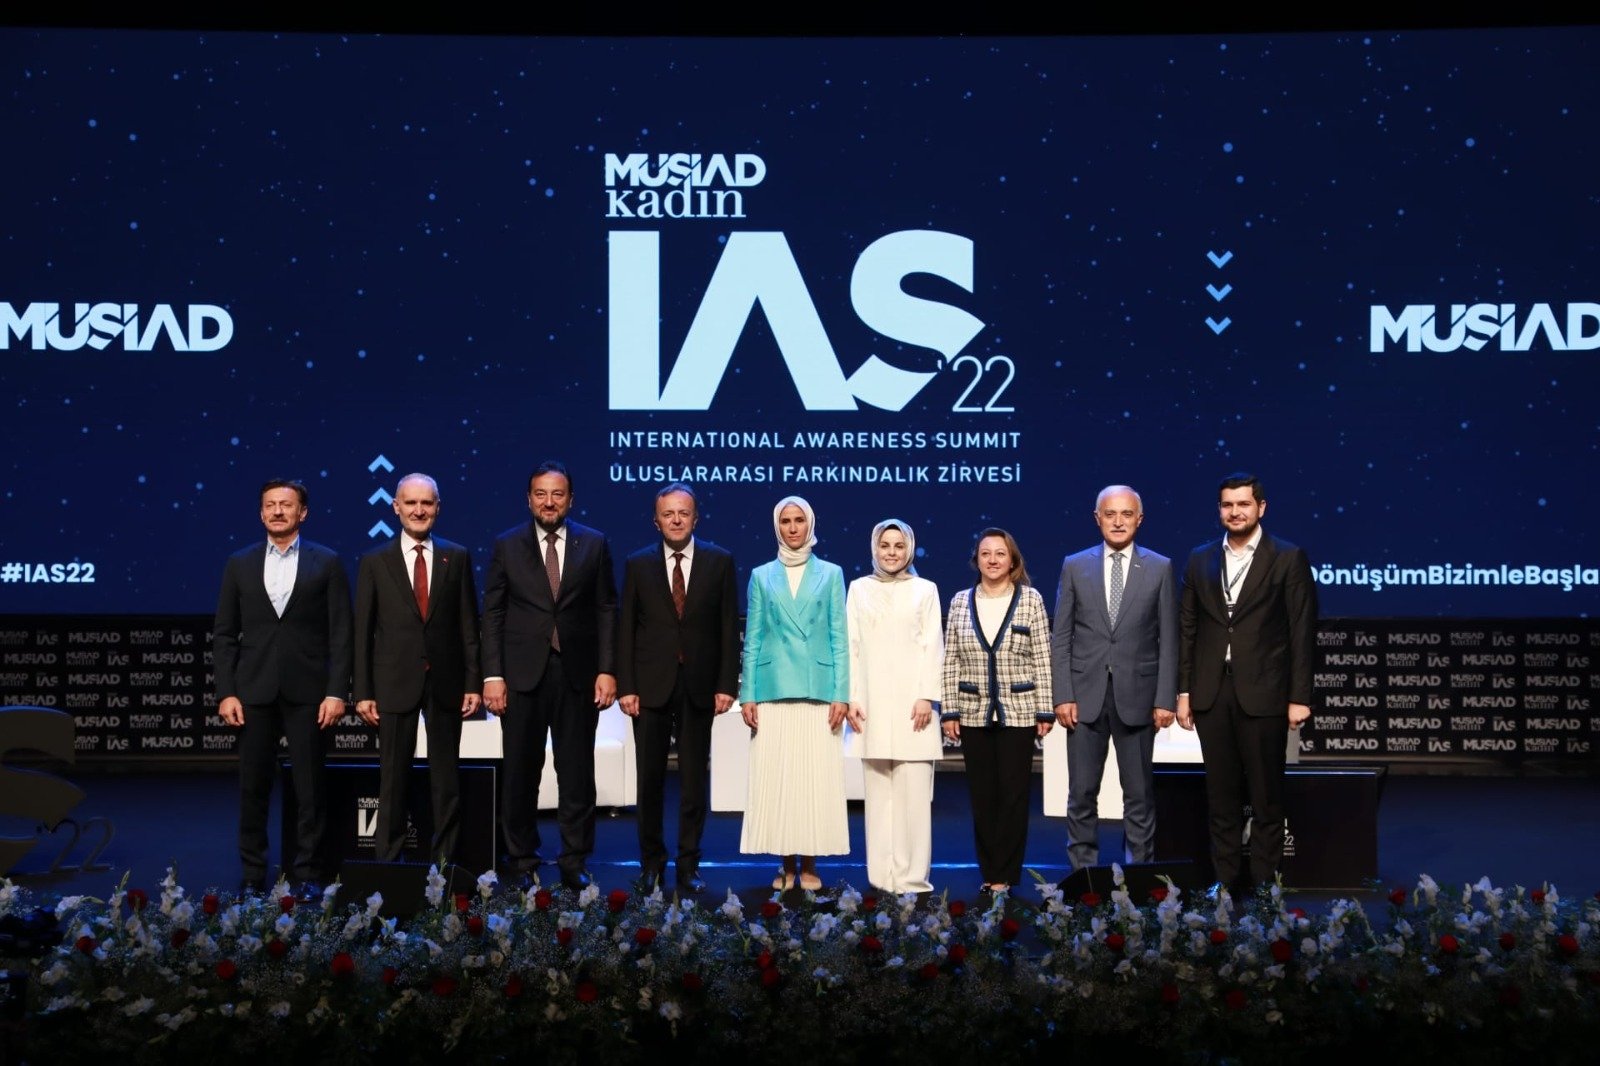 Officials pose for a photo on the sidelines of the International Awareness Summit 2022 (IAS’22), organized by MÜSIAD Women, in Istanbul, Turkey, June 14, 2022. (Courtesy of MÜSIAD)